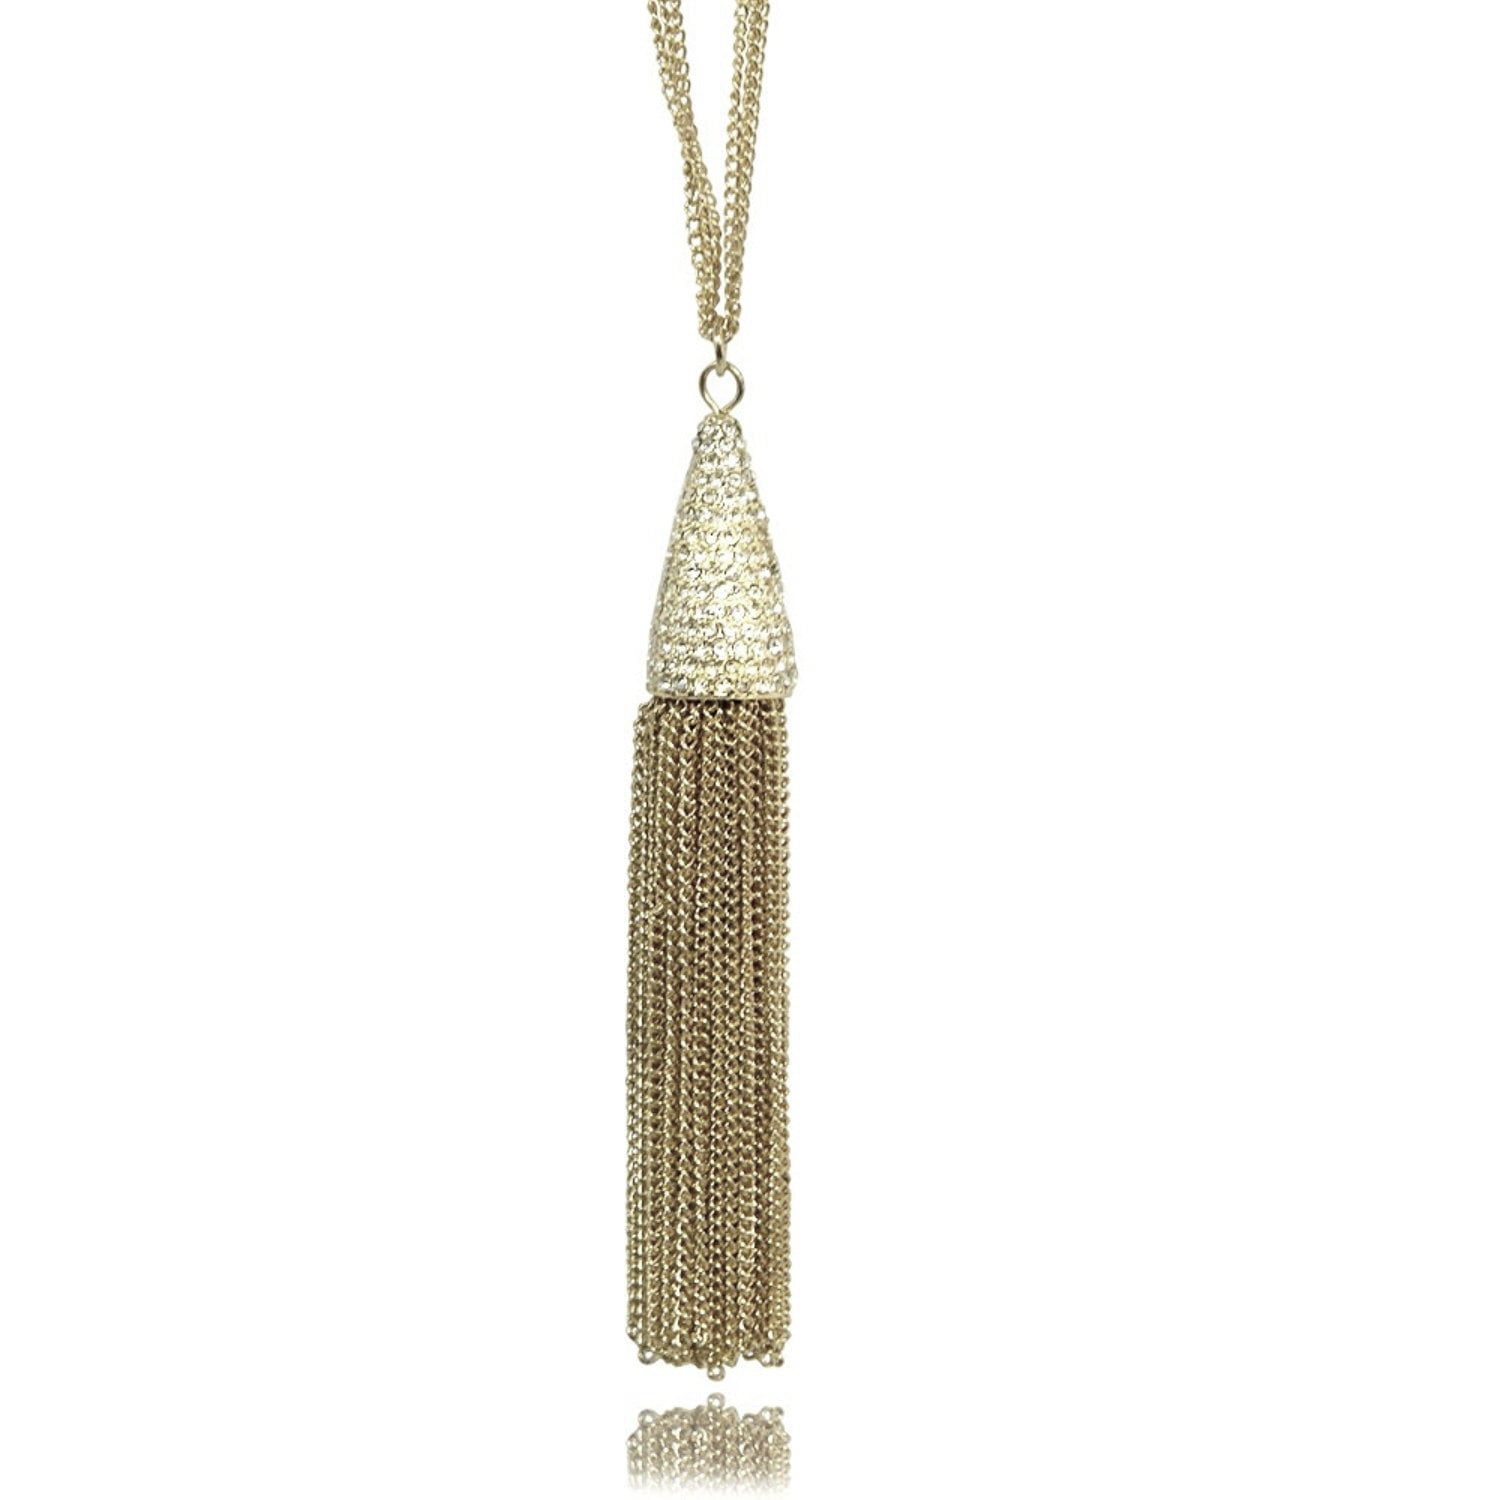 Gold Tone Pendant Necklace 21 long with Tassel Pendant